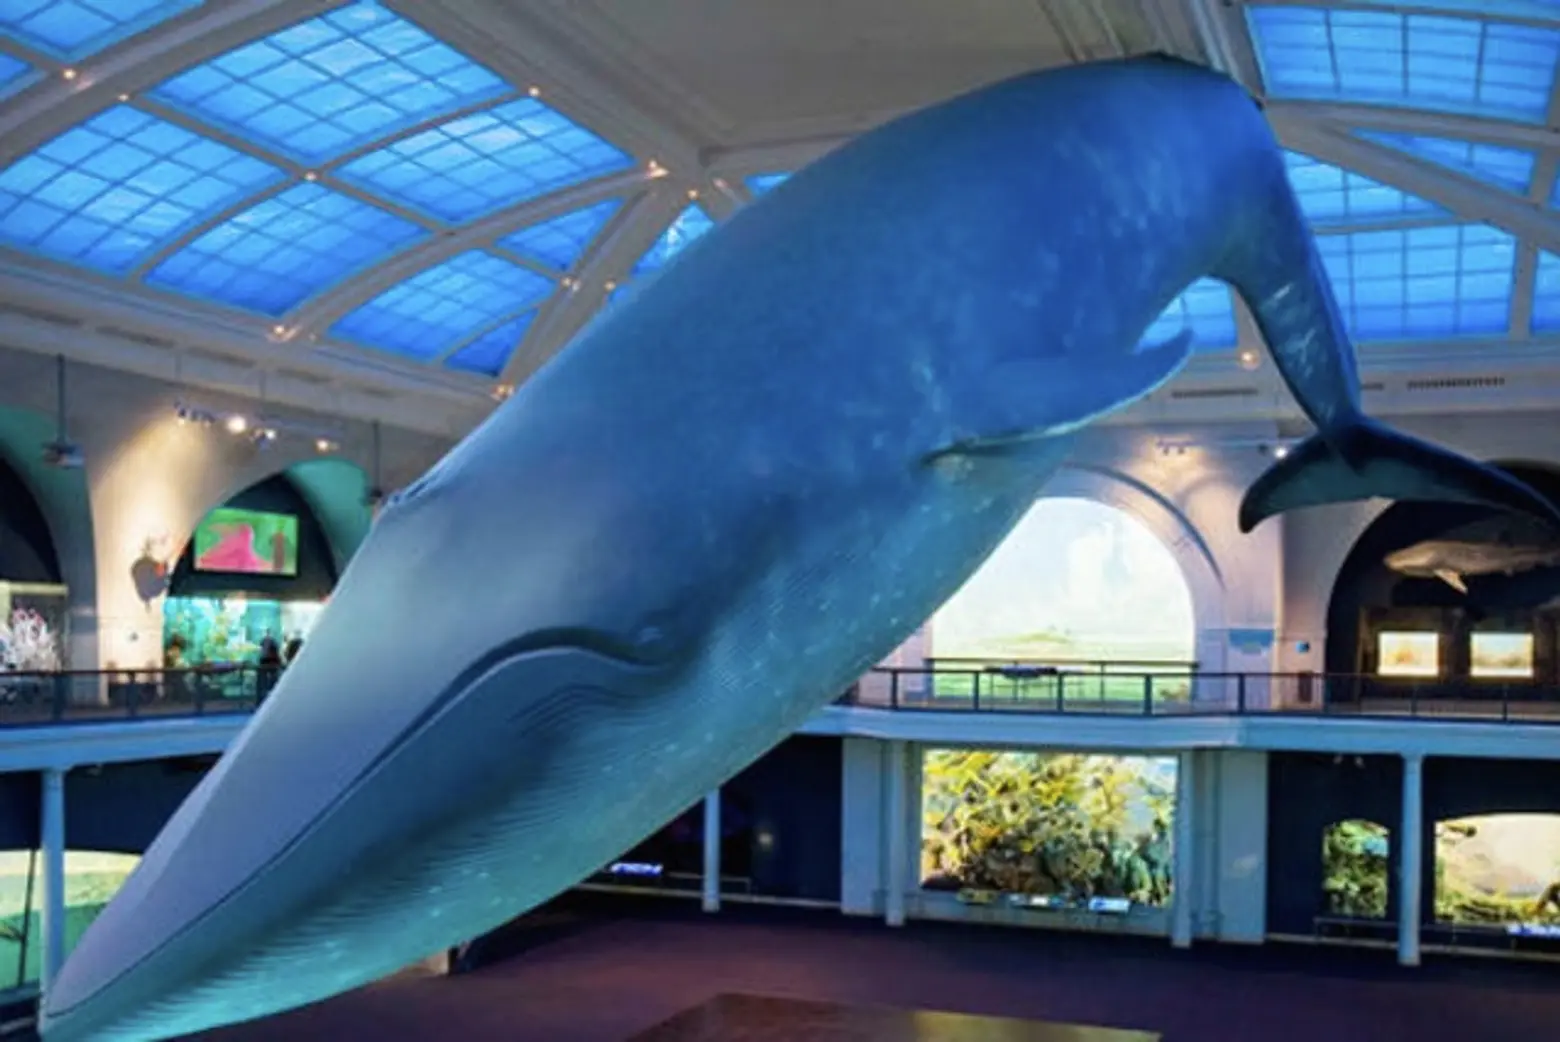 Your Daily Link Fix: No More Crumbs; A Blue Whale Gets a Bath